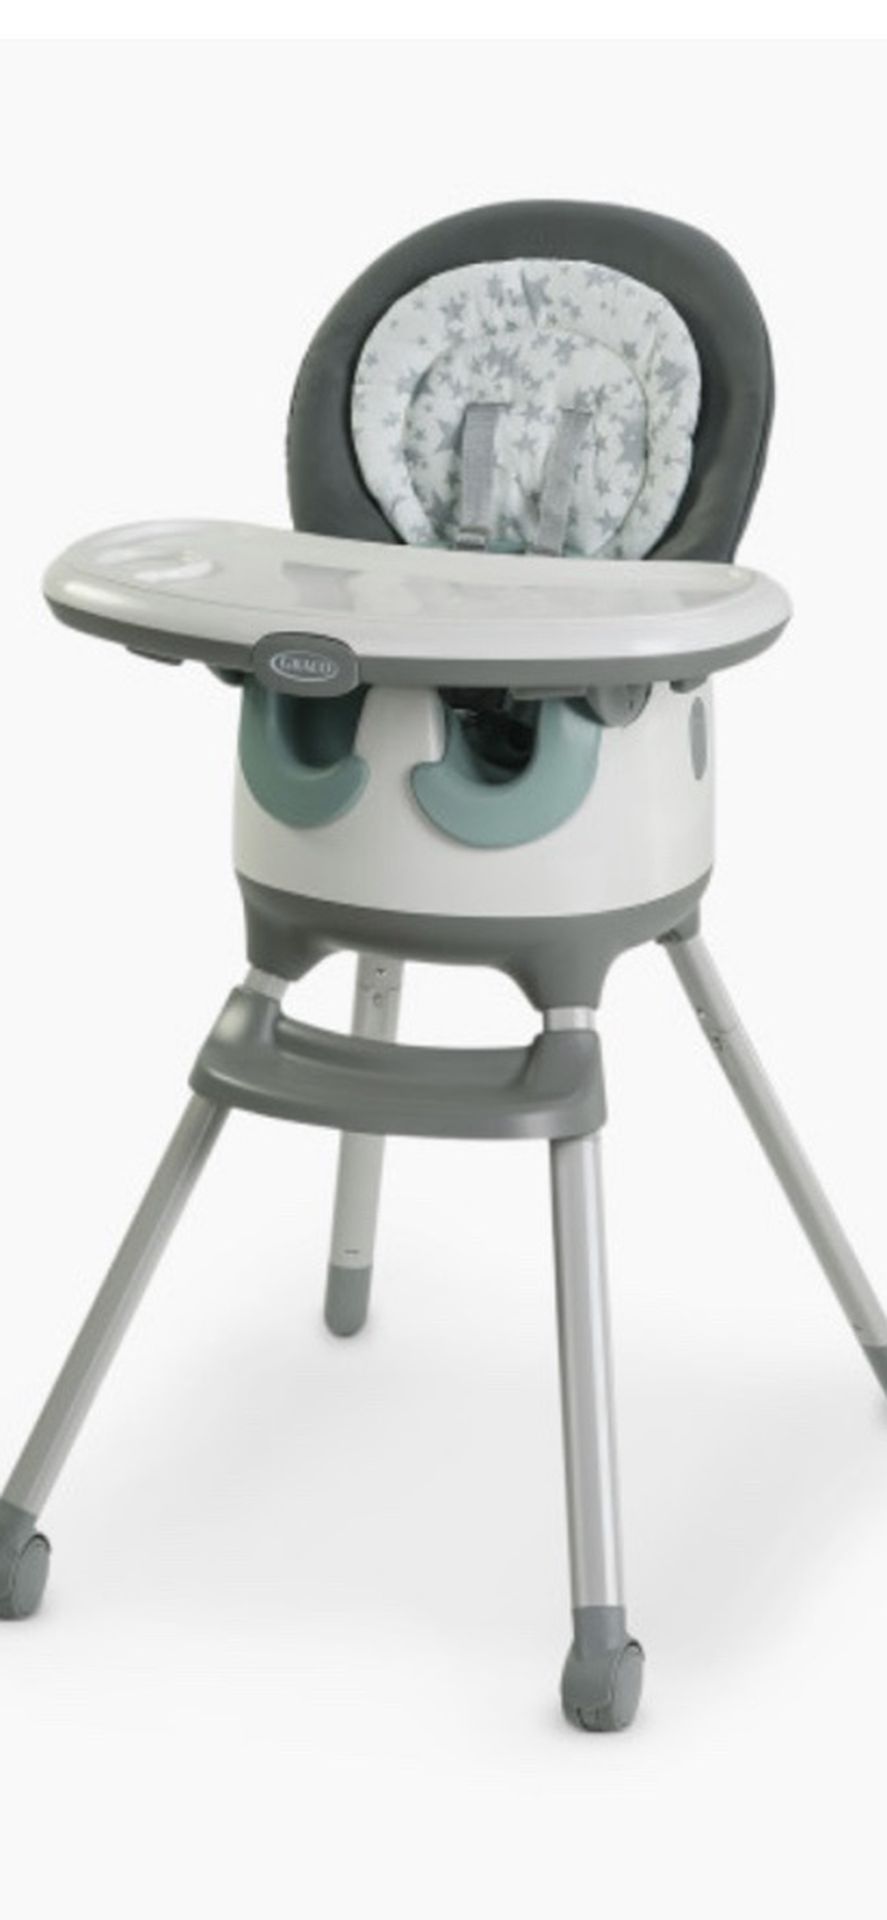 Graco Floor2Table 7 in 1 High Chair | Converts to an Infant Floor Seat, Booster Seat, Kids Table and More, Oskar